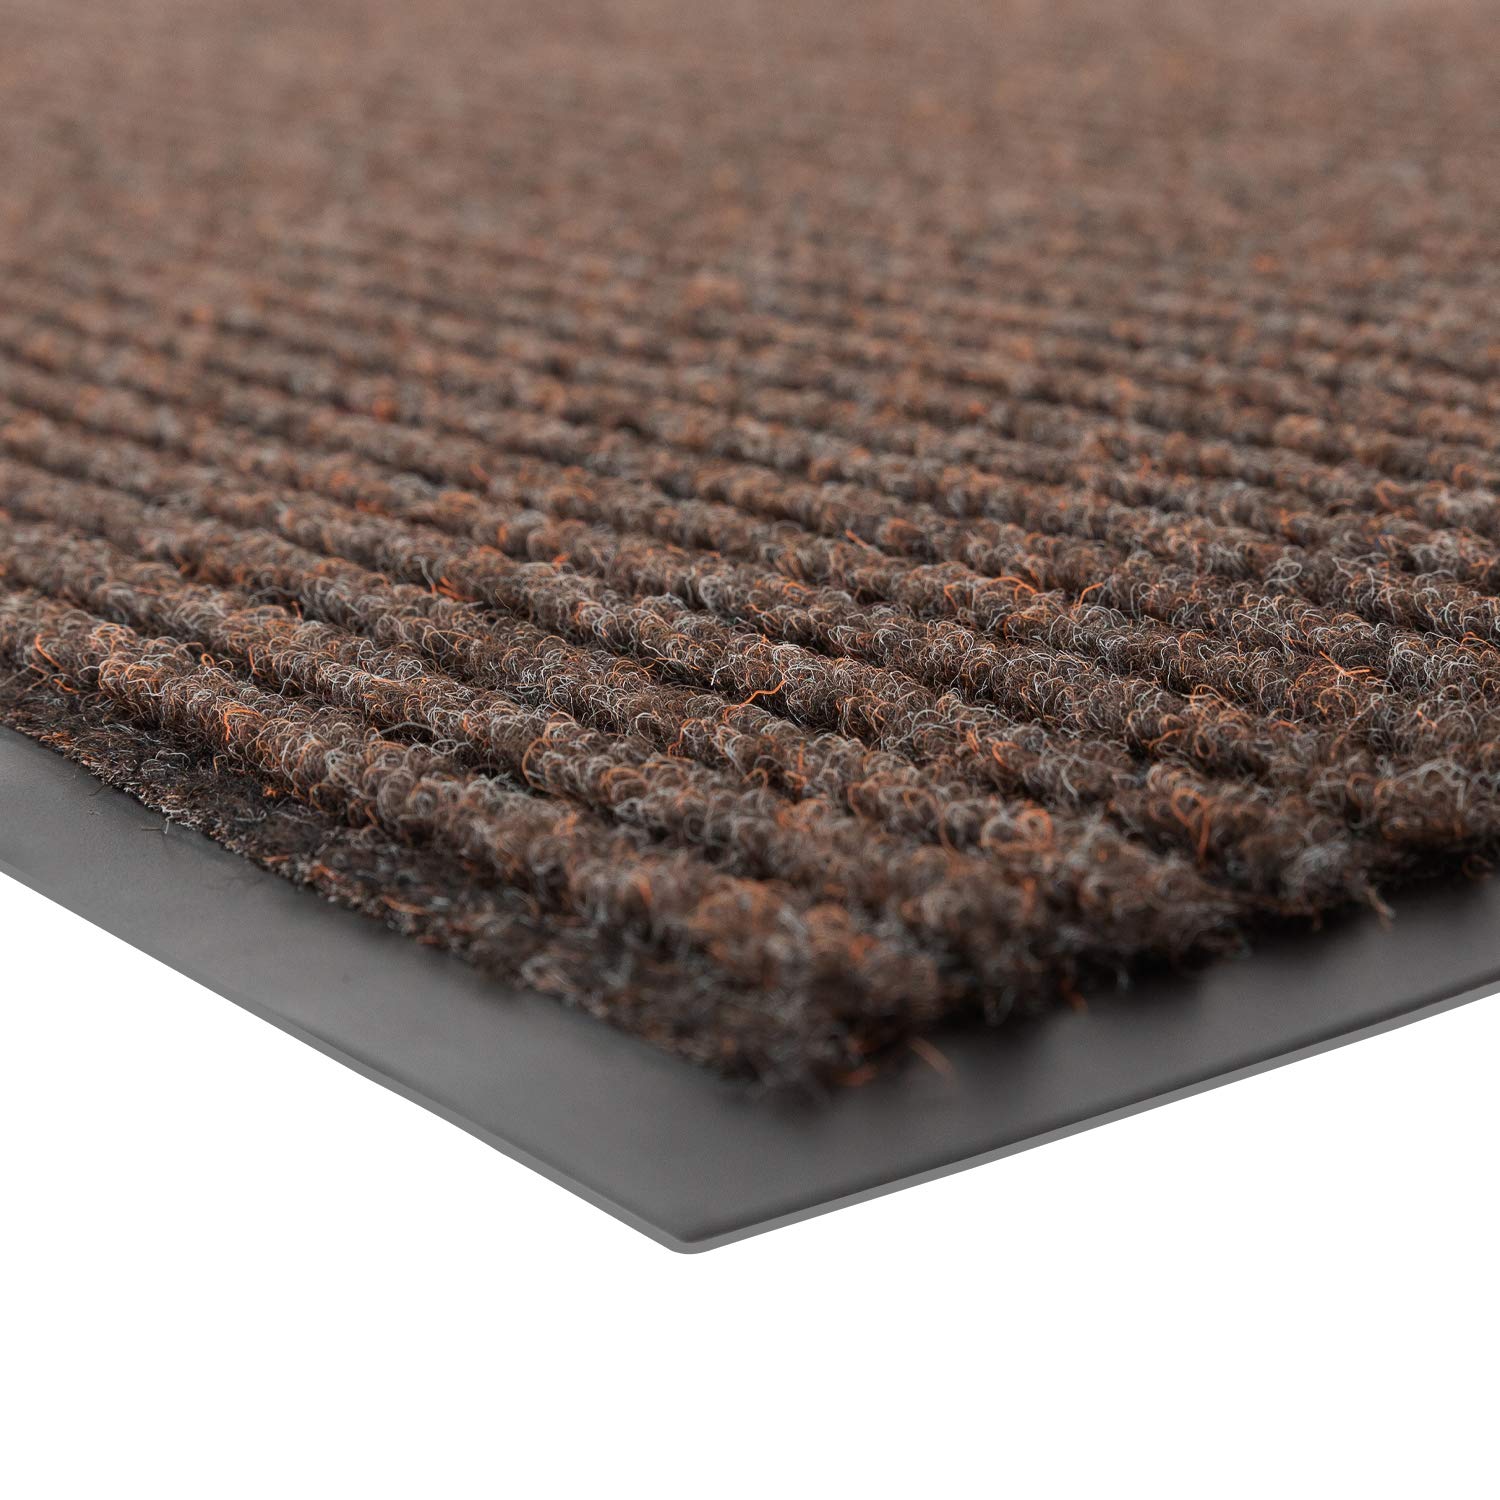 Notrax - 109S0035BR 109 Brush Step Entrance Mat, for Home or Office, 3' X 5' Brown